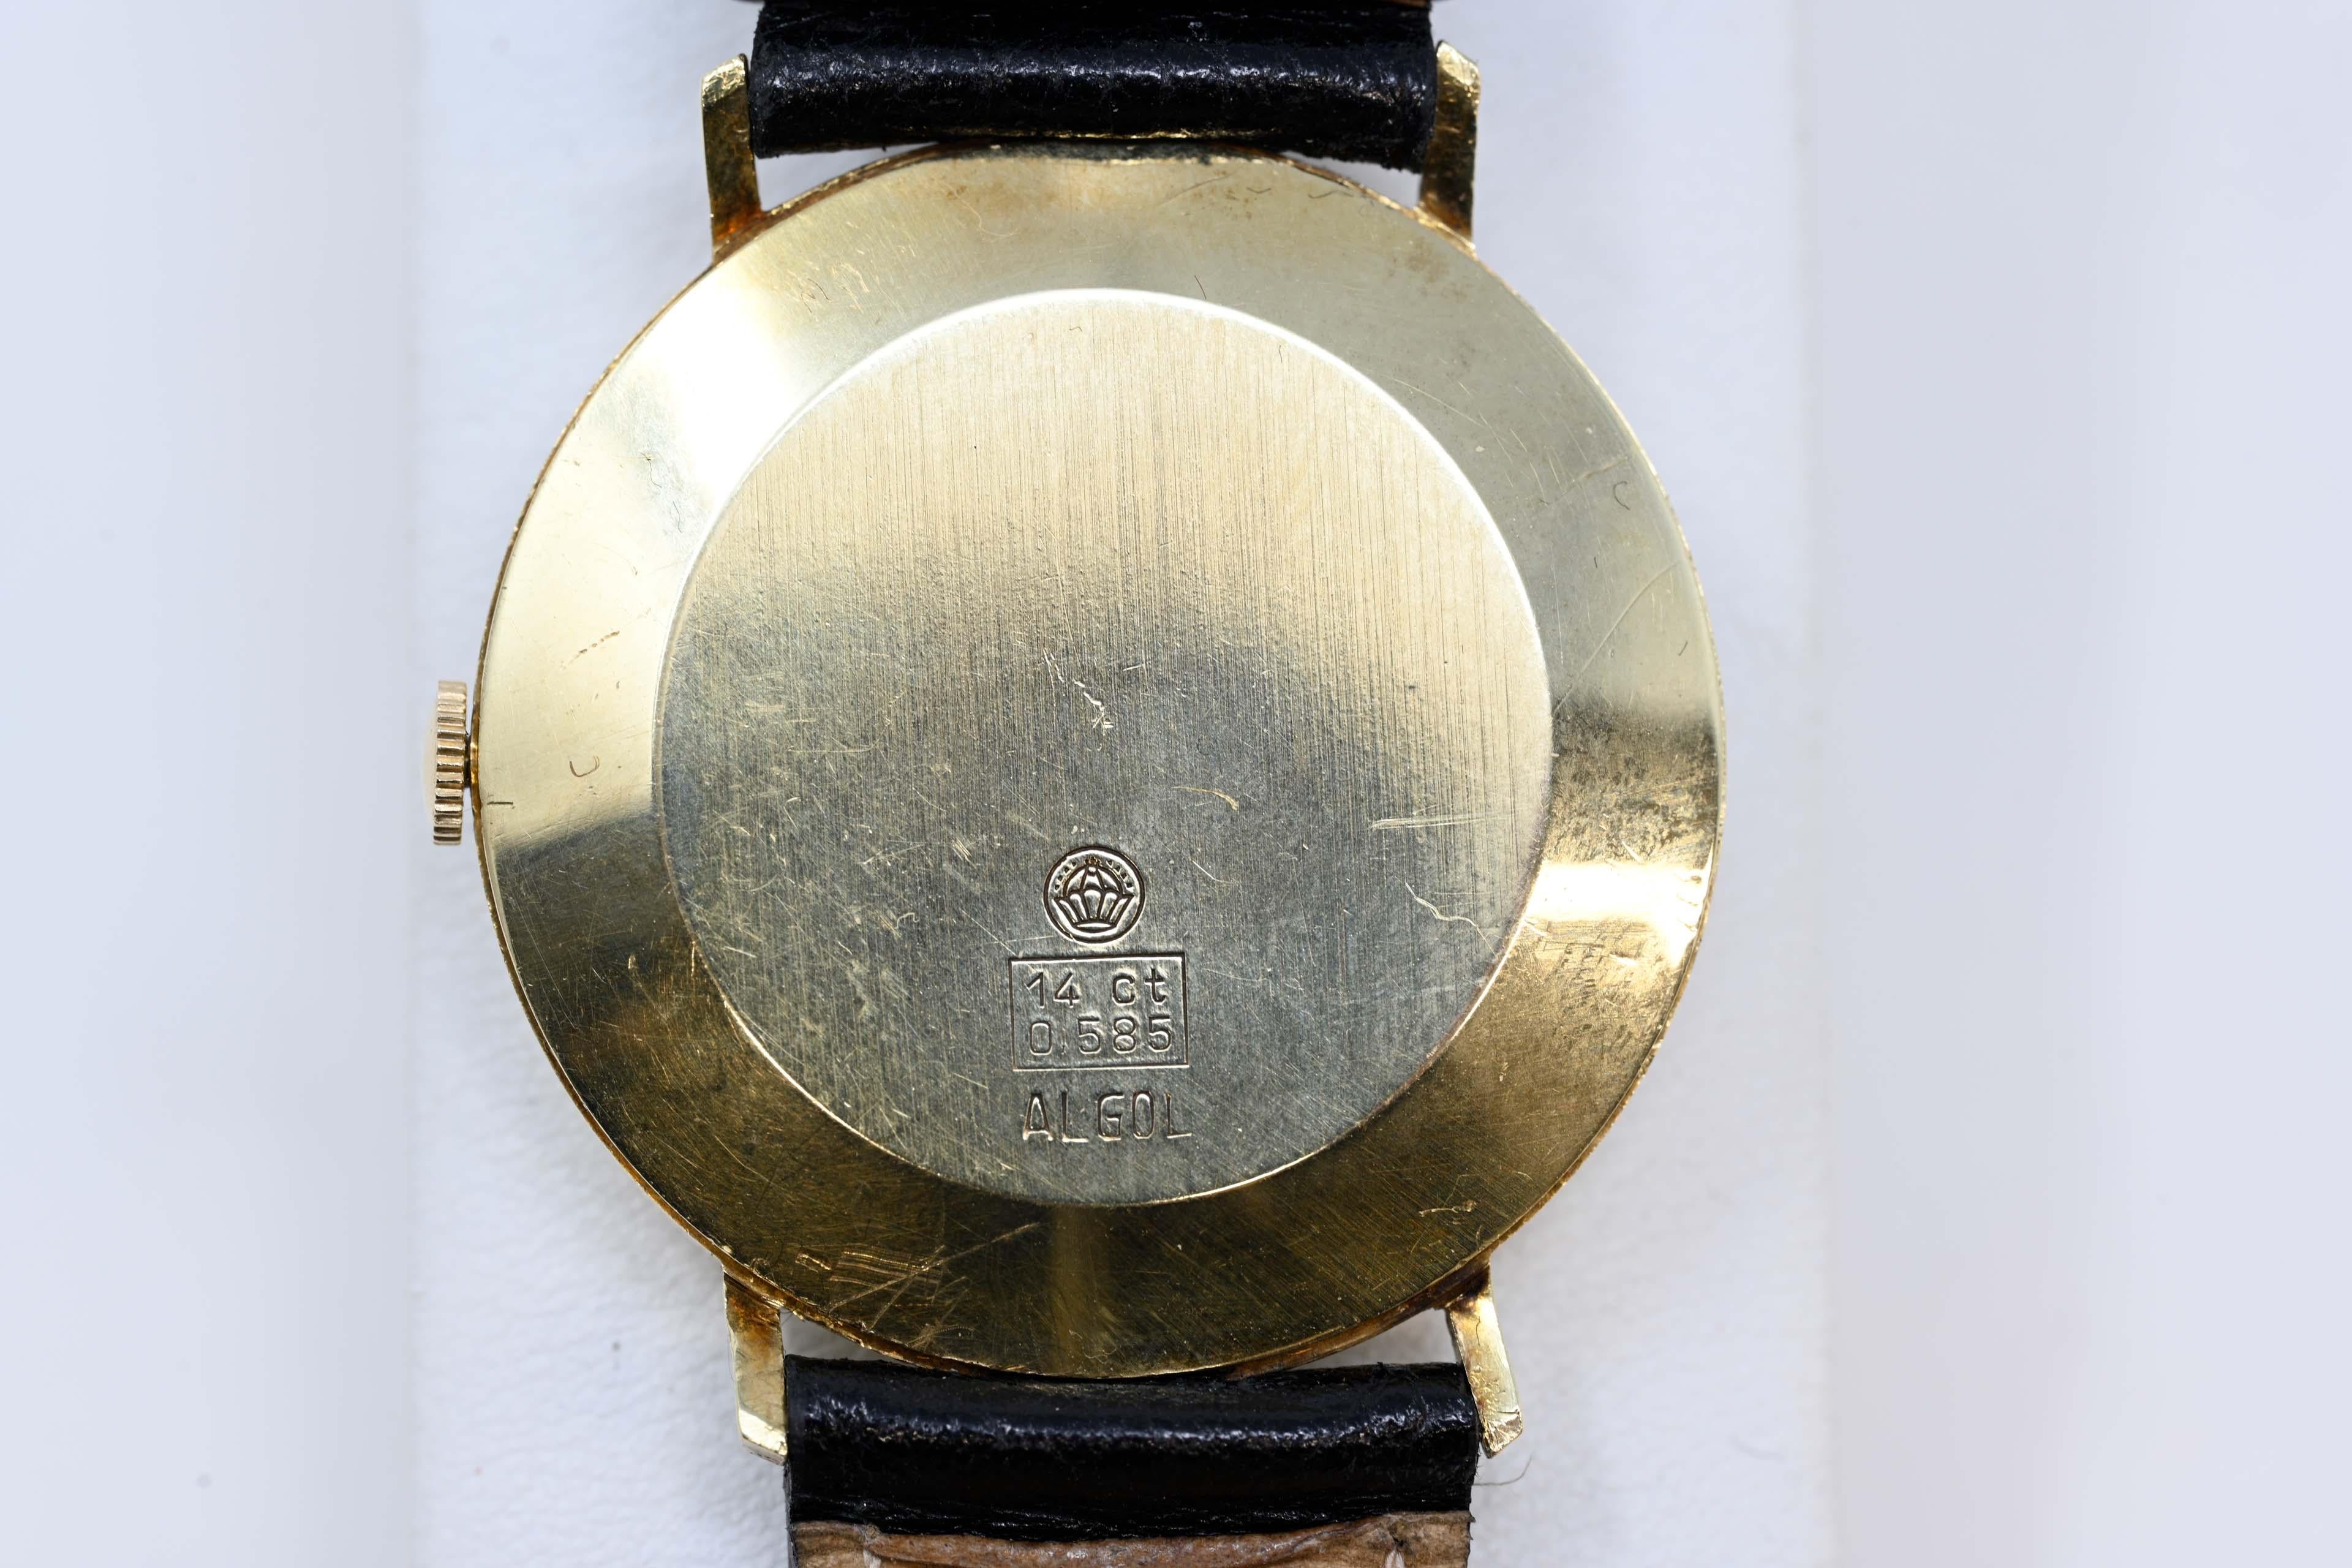 Lord Norle 14k gold men's watch mechanical movement, manual winding , Swiss made circa 
1960-70. 
21 jewel case measures 33.5 mm, leather strap. In working order, minor chip on the crystal.